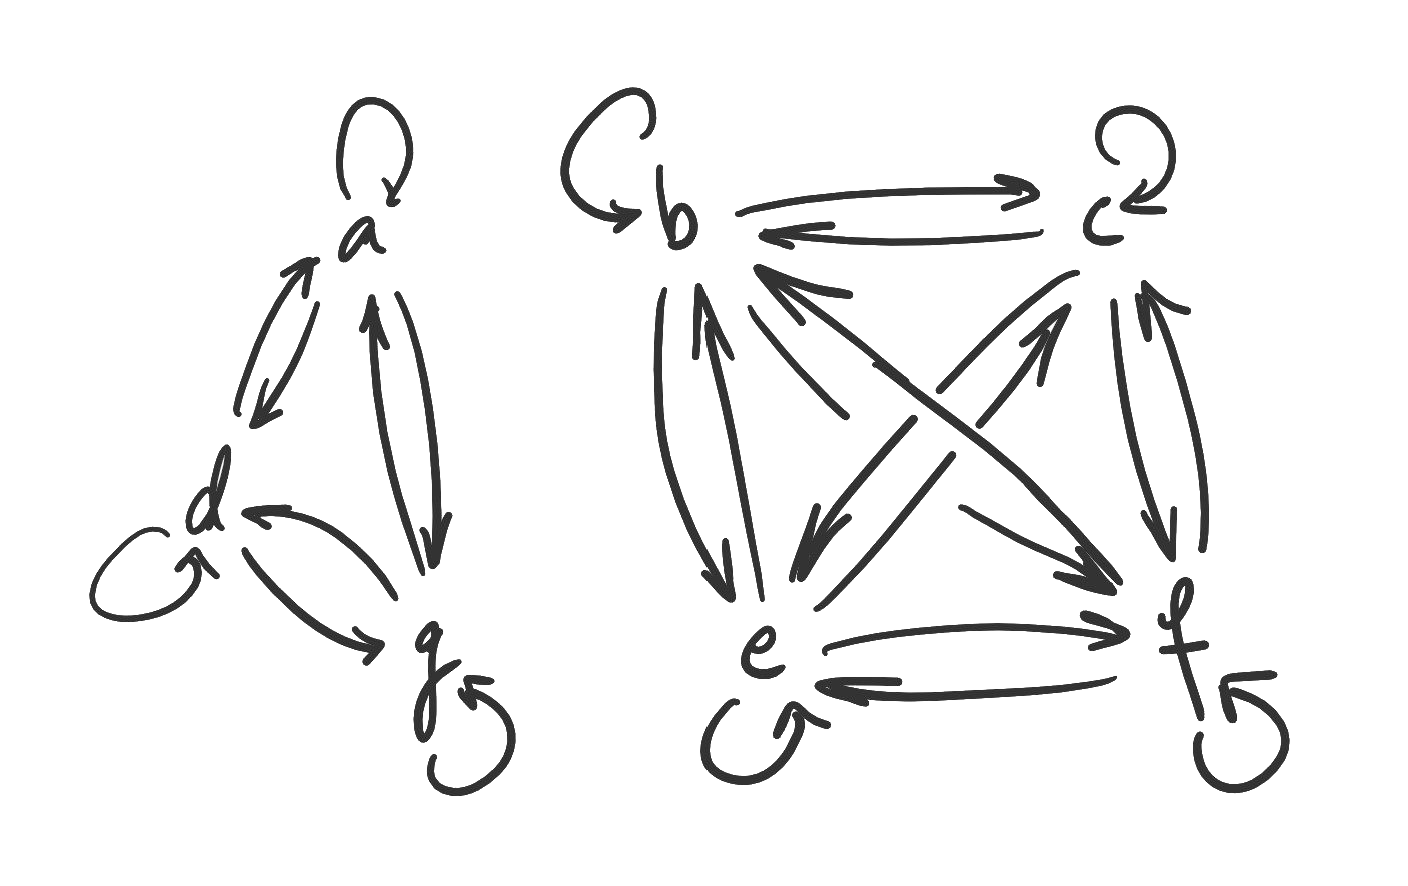 The directed graph of the relation. Three elements occupy their own triangle, while the other four have their own square.